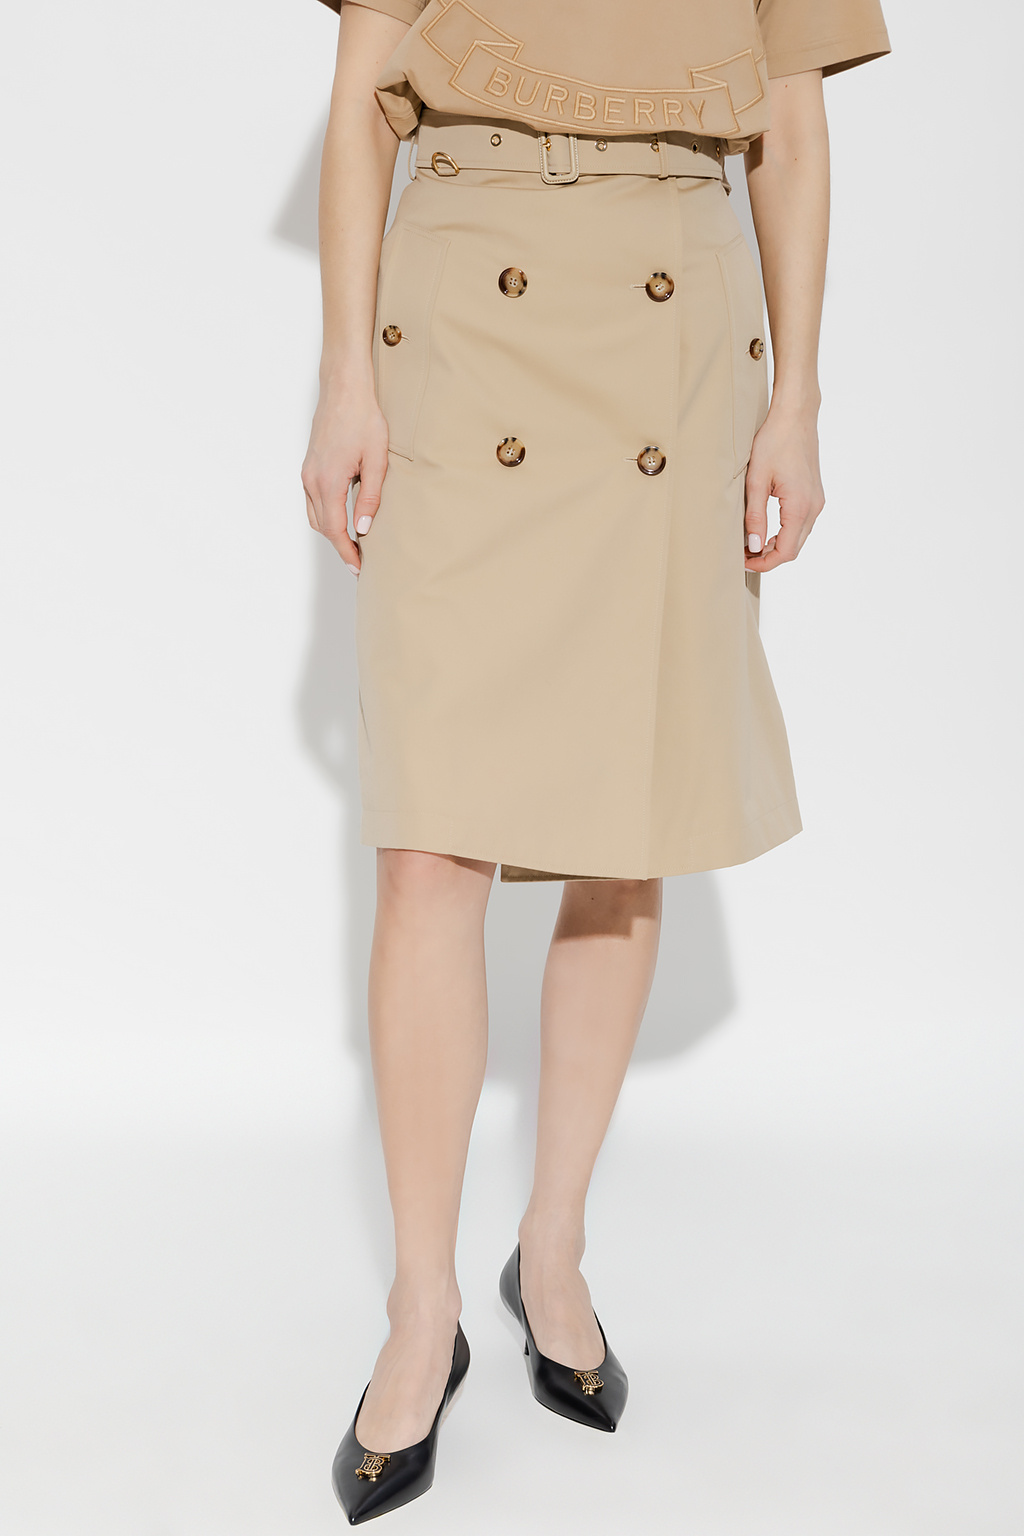 Burberry ‘Alice’ belted skirt